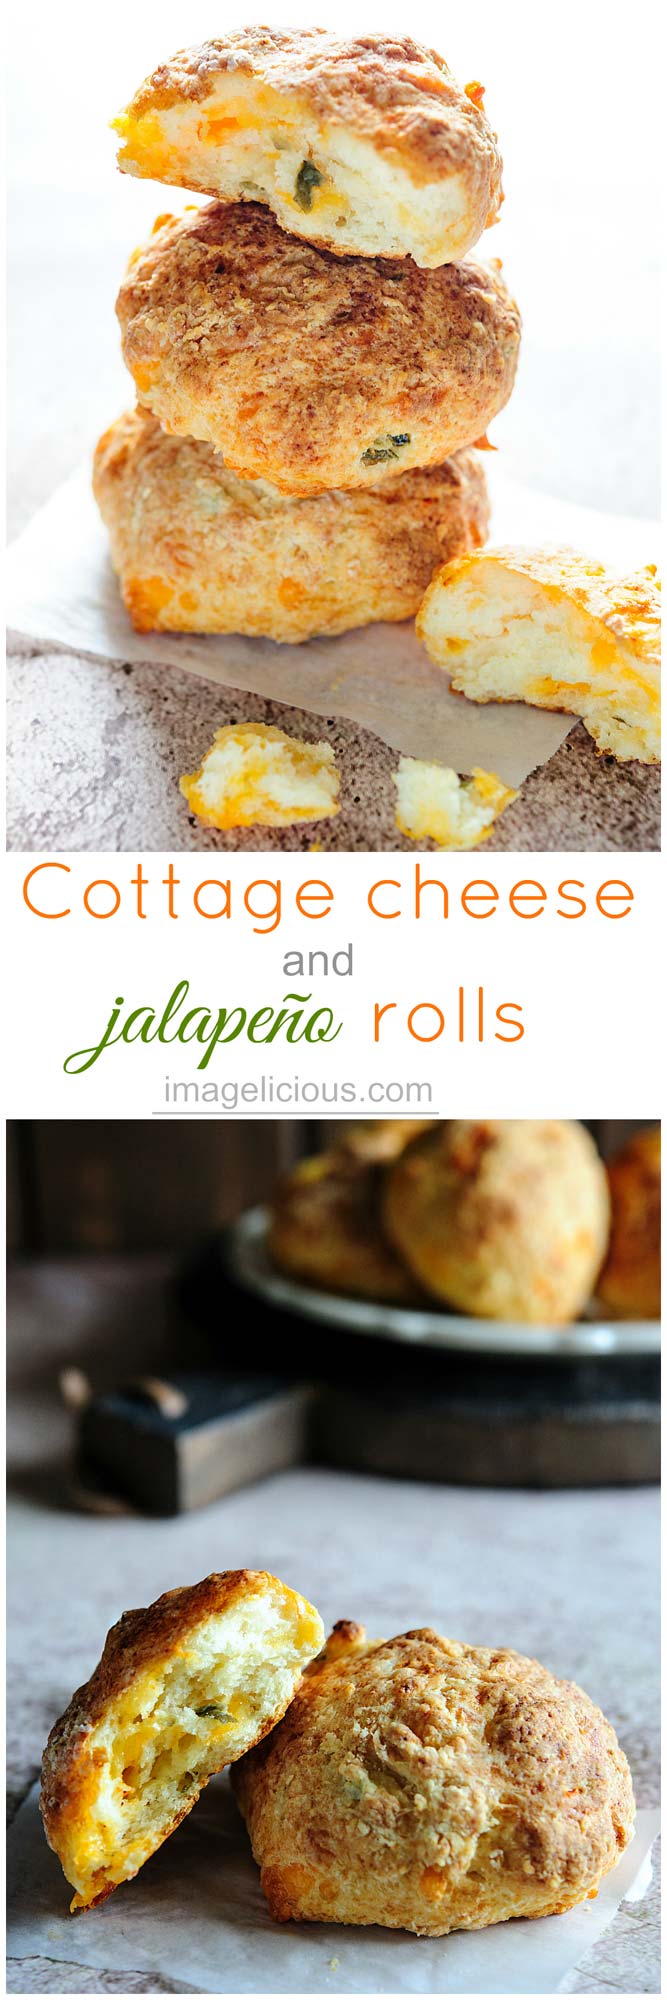 Cheesy, spicy, soft and spongy these Cottage Cheese and Jalapeño Rolls are easy to make. They are perfect for eating on their own or using in sandwiches | Imagelicious